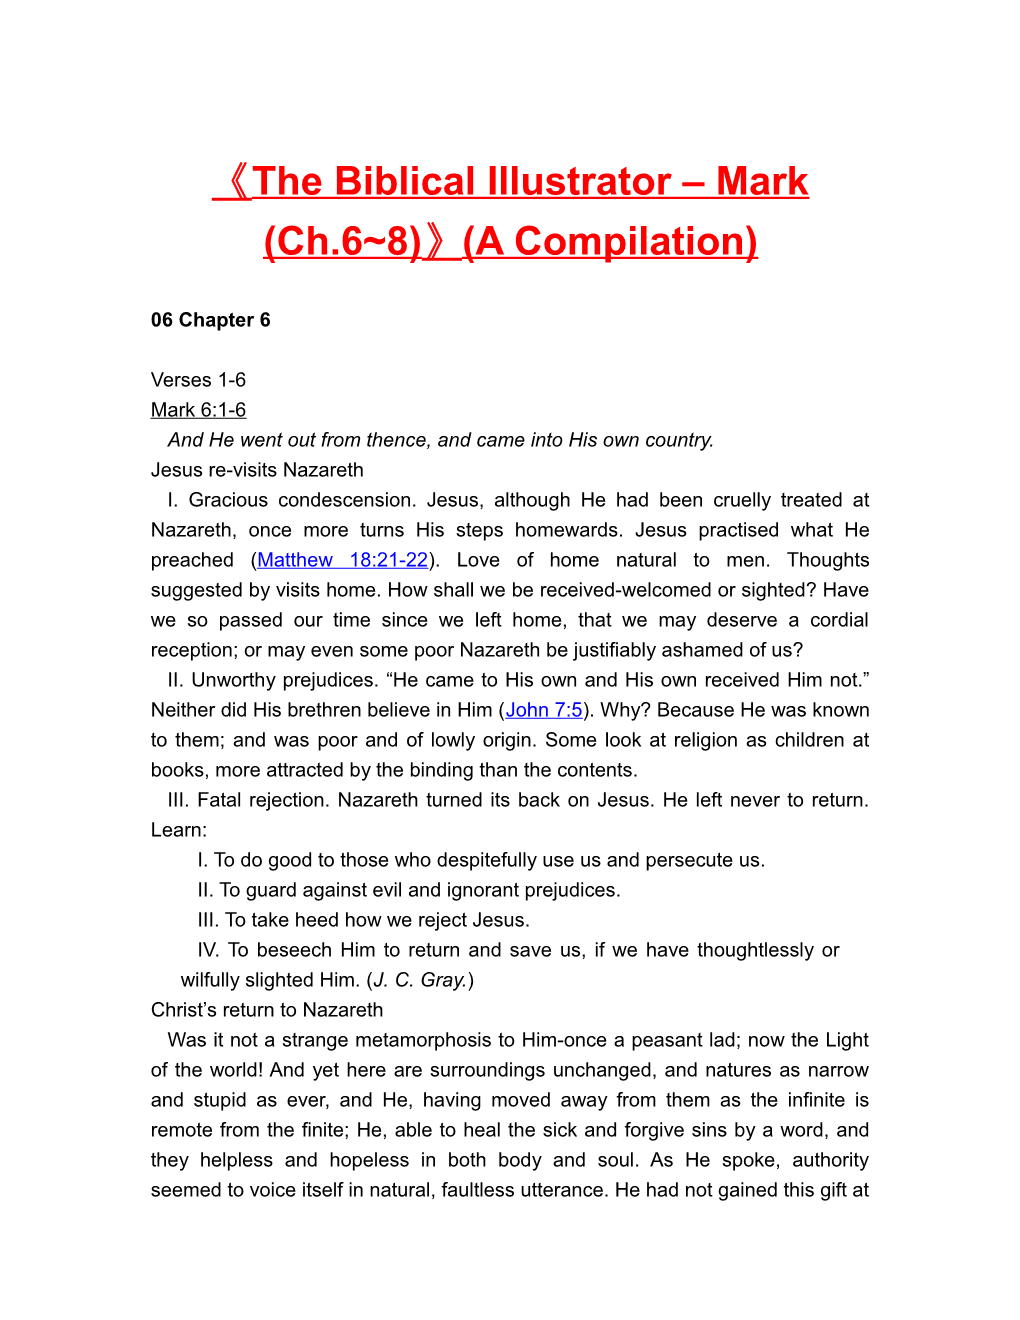 The Biblical Illustrator Mark (Ch.6 8) (A Compilation)